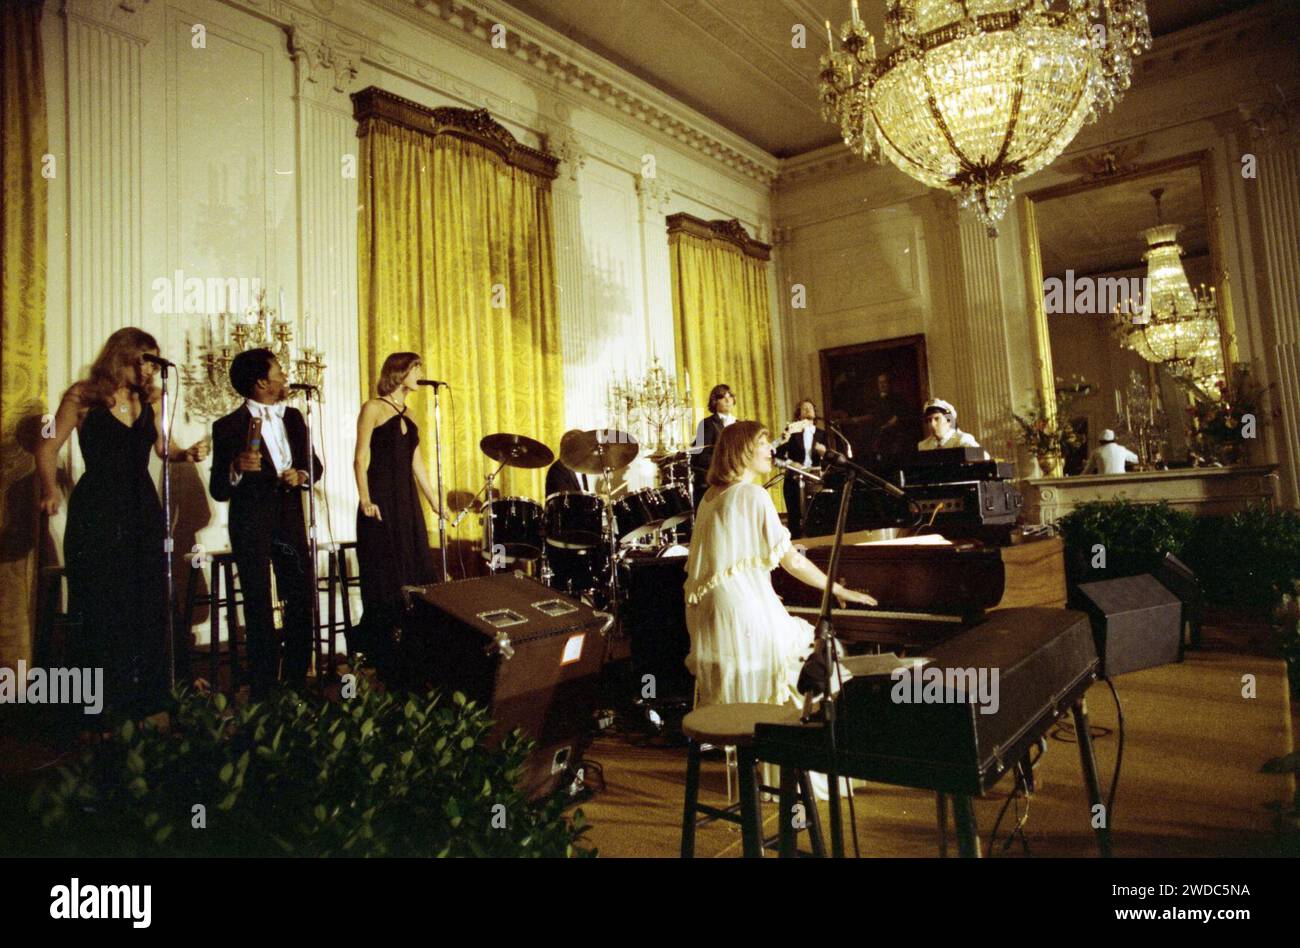 Photograph of Toni Tennille and Daryl Dragon of The Captain and Tennille Performing in the East Room during the Entertainment Portion of a State Dinner Honoring Queen Elizabeth II and Prince Philip of Great Britain - Stock Photo